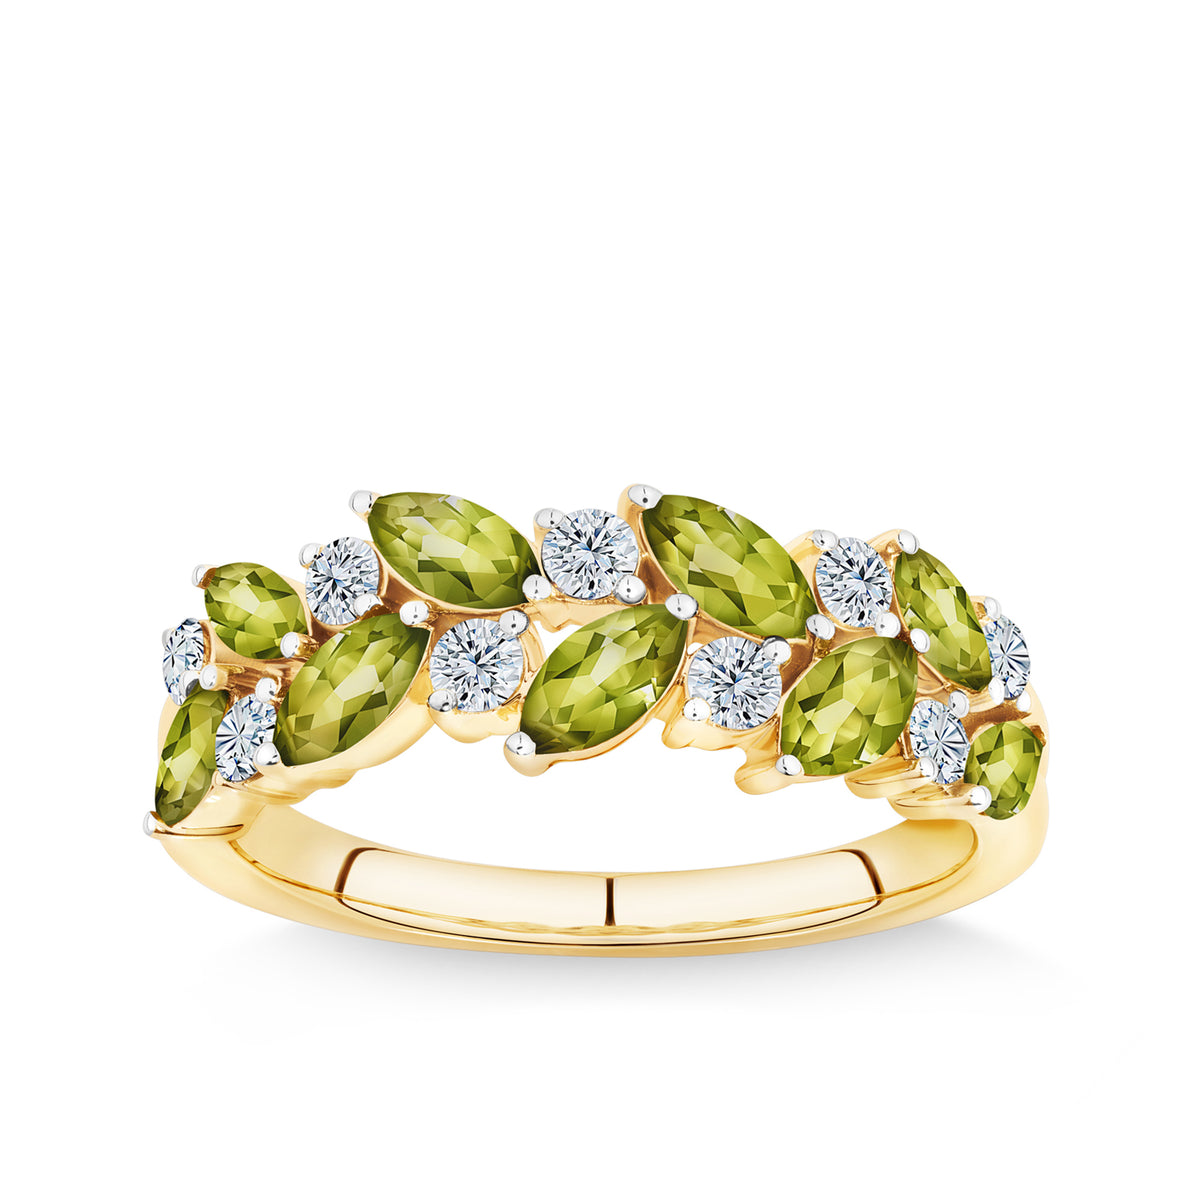 Marquise Cut Green Tourmaline & 0.30ct TW Diamond Ring in 9ct Yellow Gold